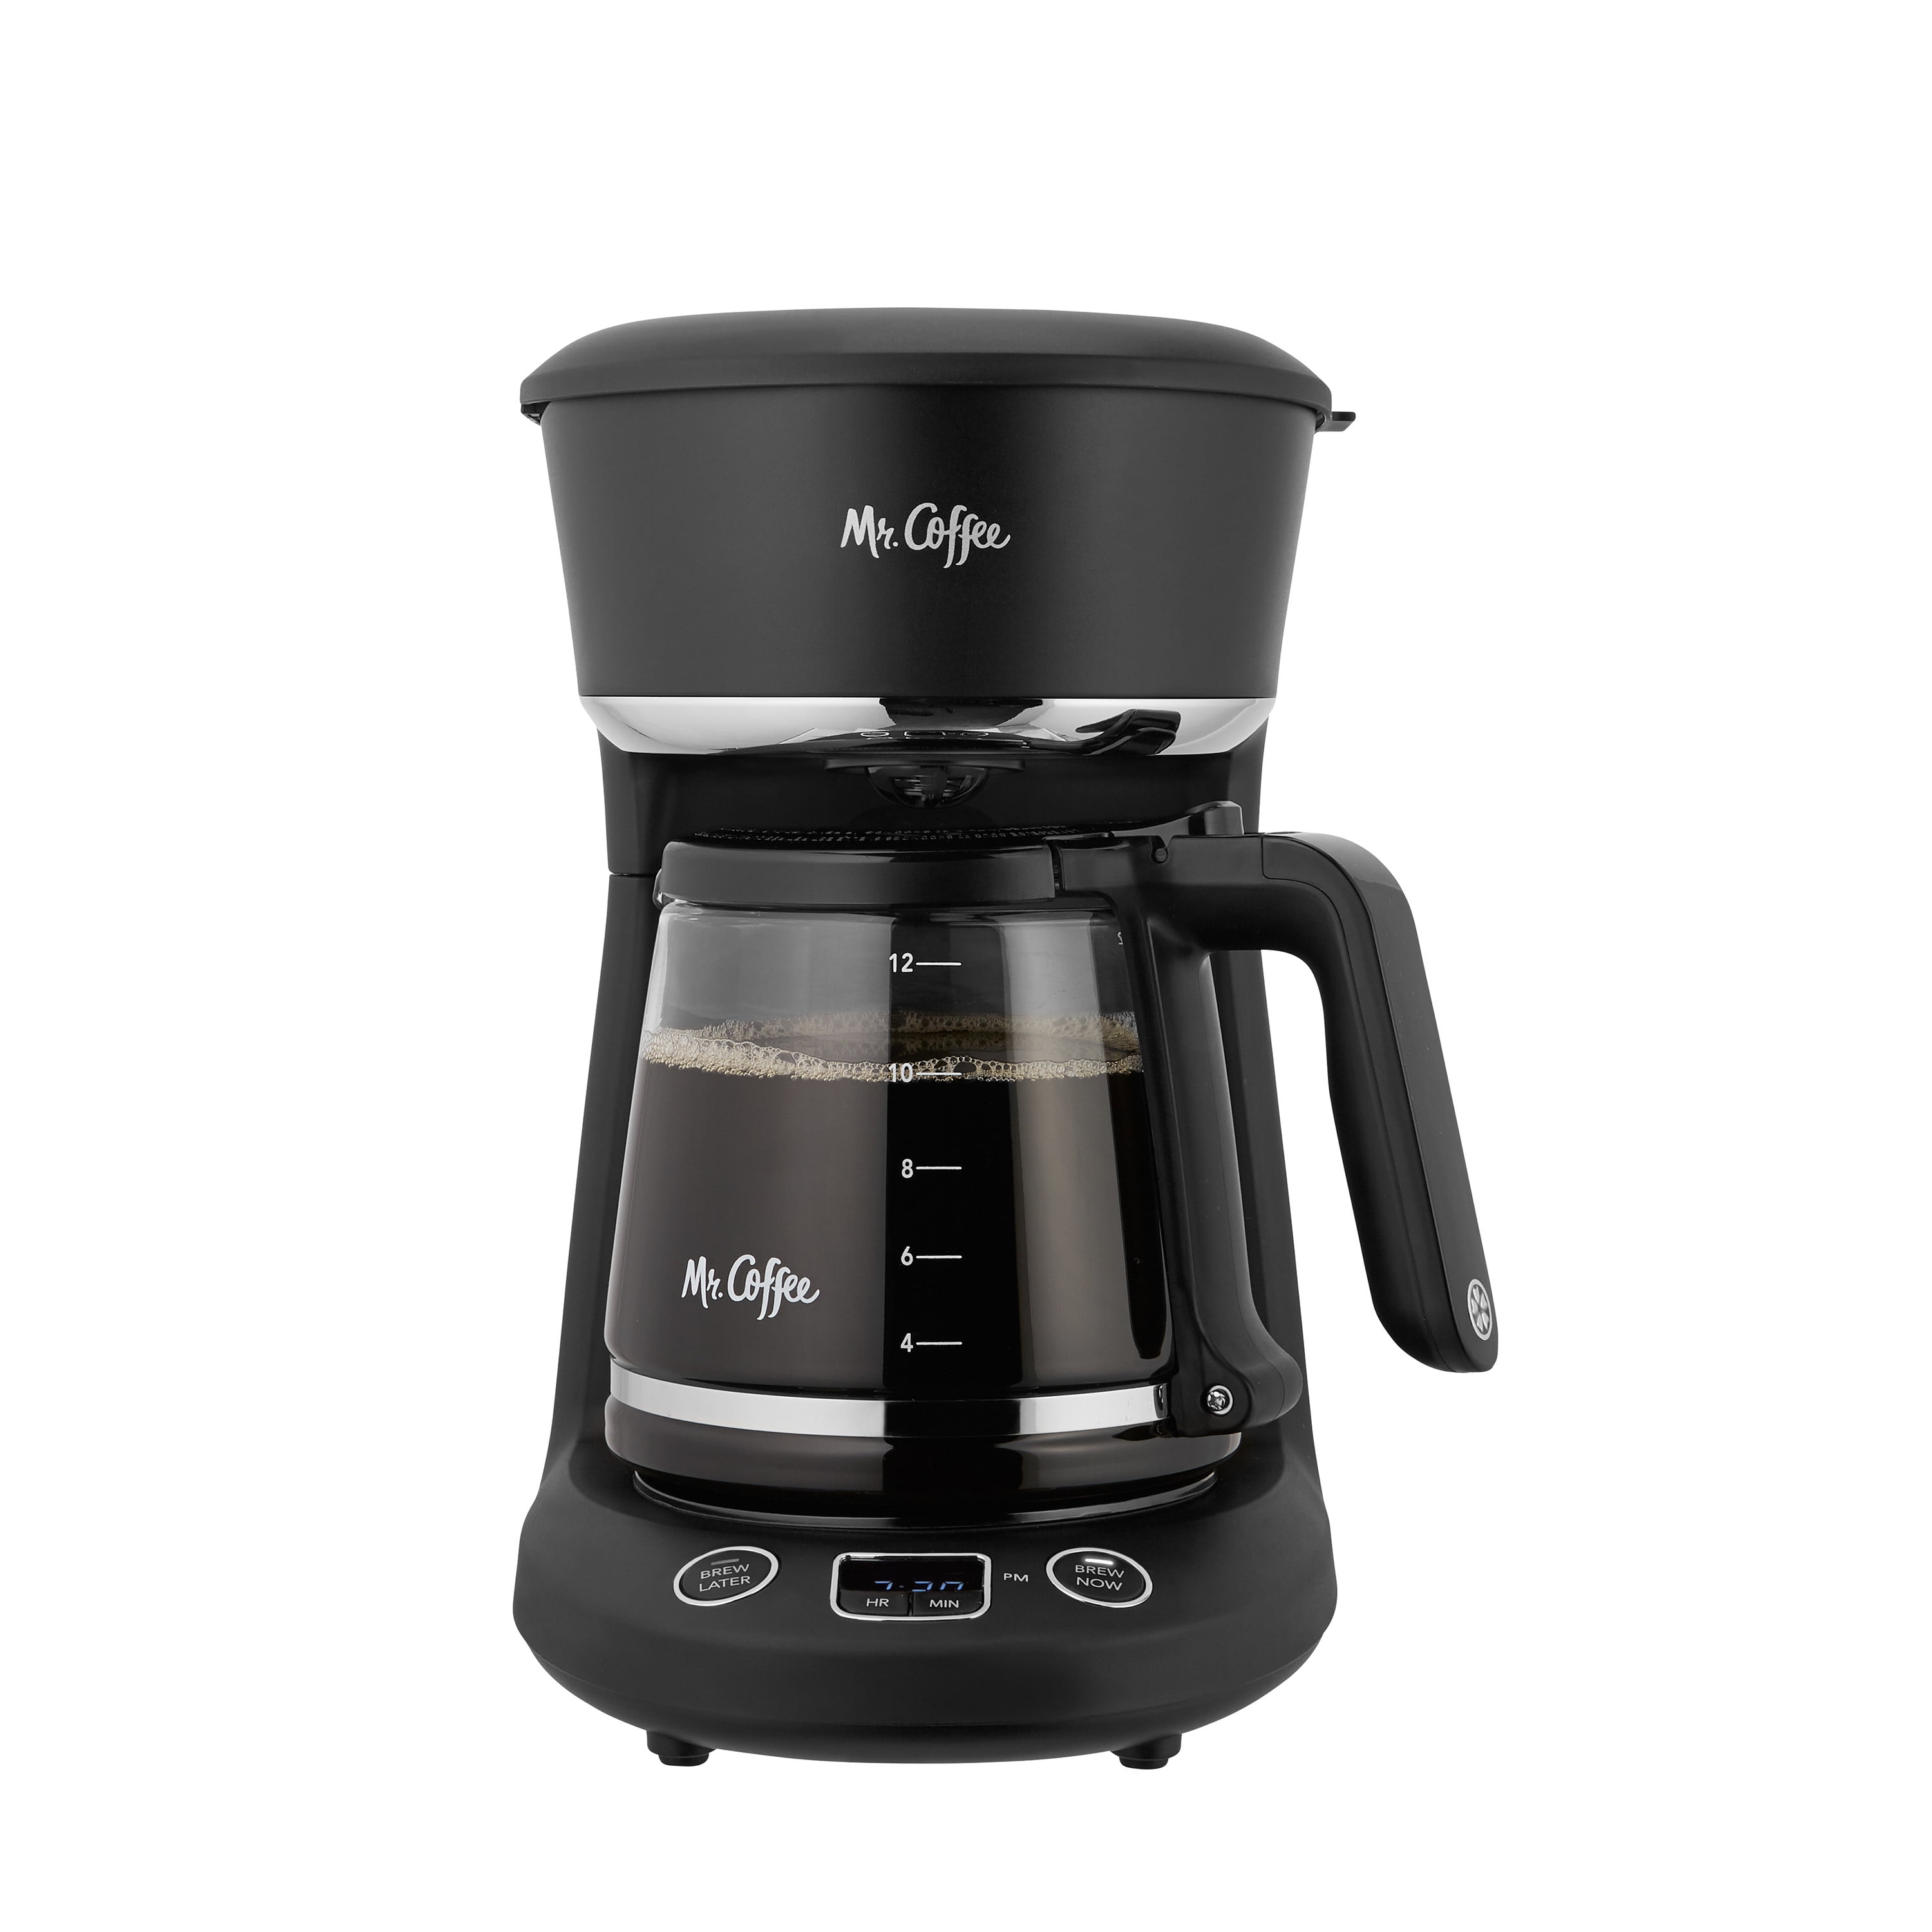 Shop Coffeemakers now!, 12-Cup Programmable BCM1410R